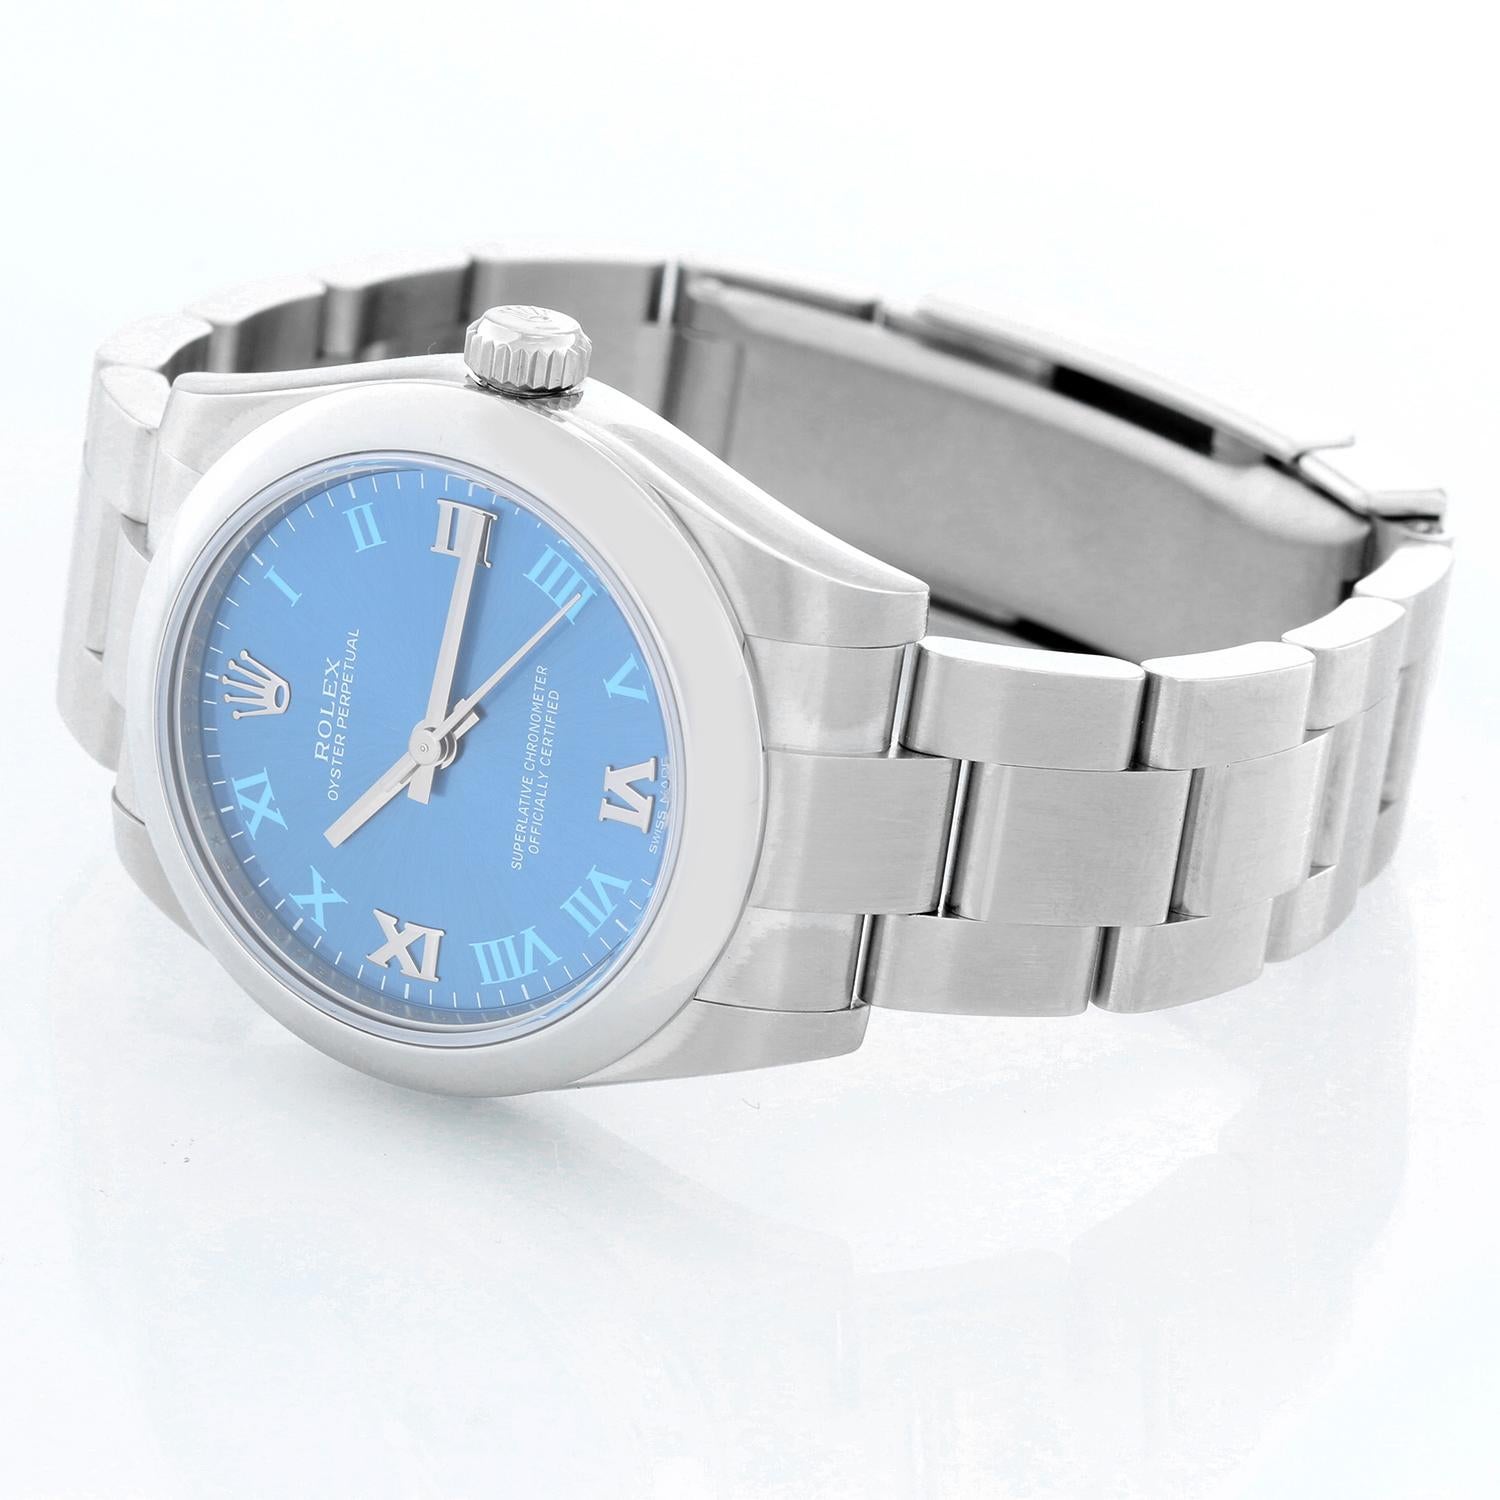 Rolex Oyster Perpetual No-Date Blue Dial Midsize Steel Watch 177200 - Automatic winding. Stainless steel case with smooth bezel ( 31 mm). Blue dial with Roman numerals. Stainless steel Oyster bracelet. Pre-owned with custom box and card. Dated 2014. 